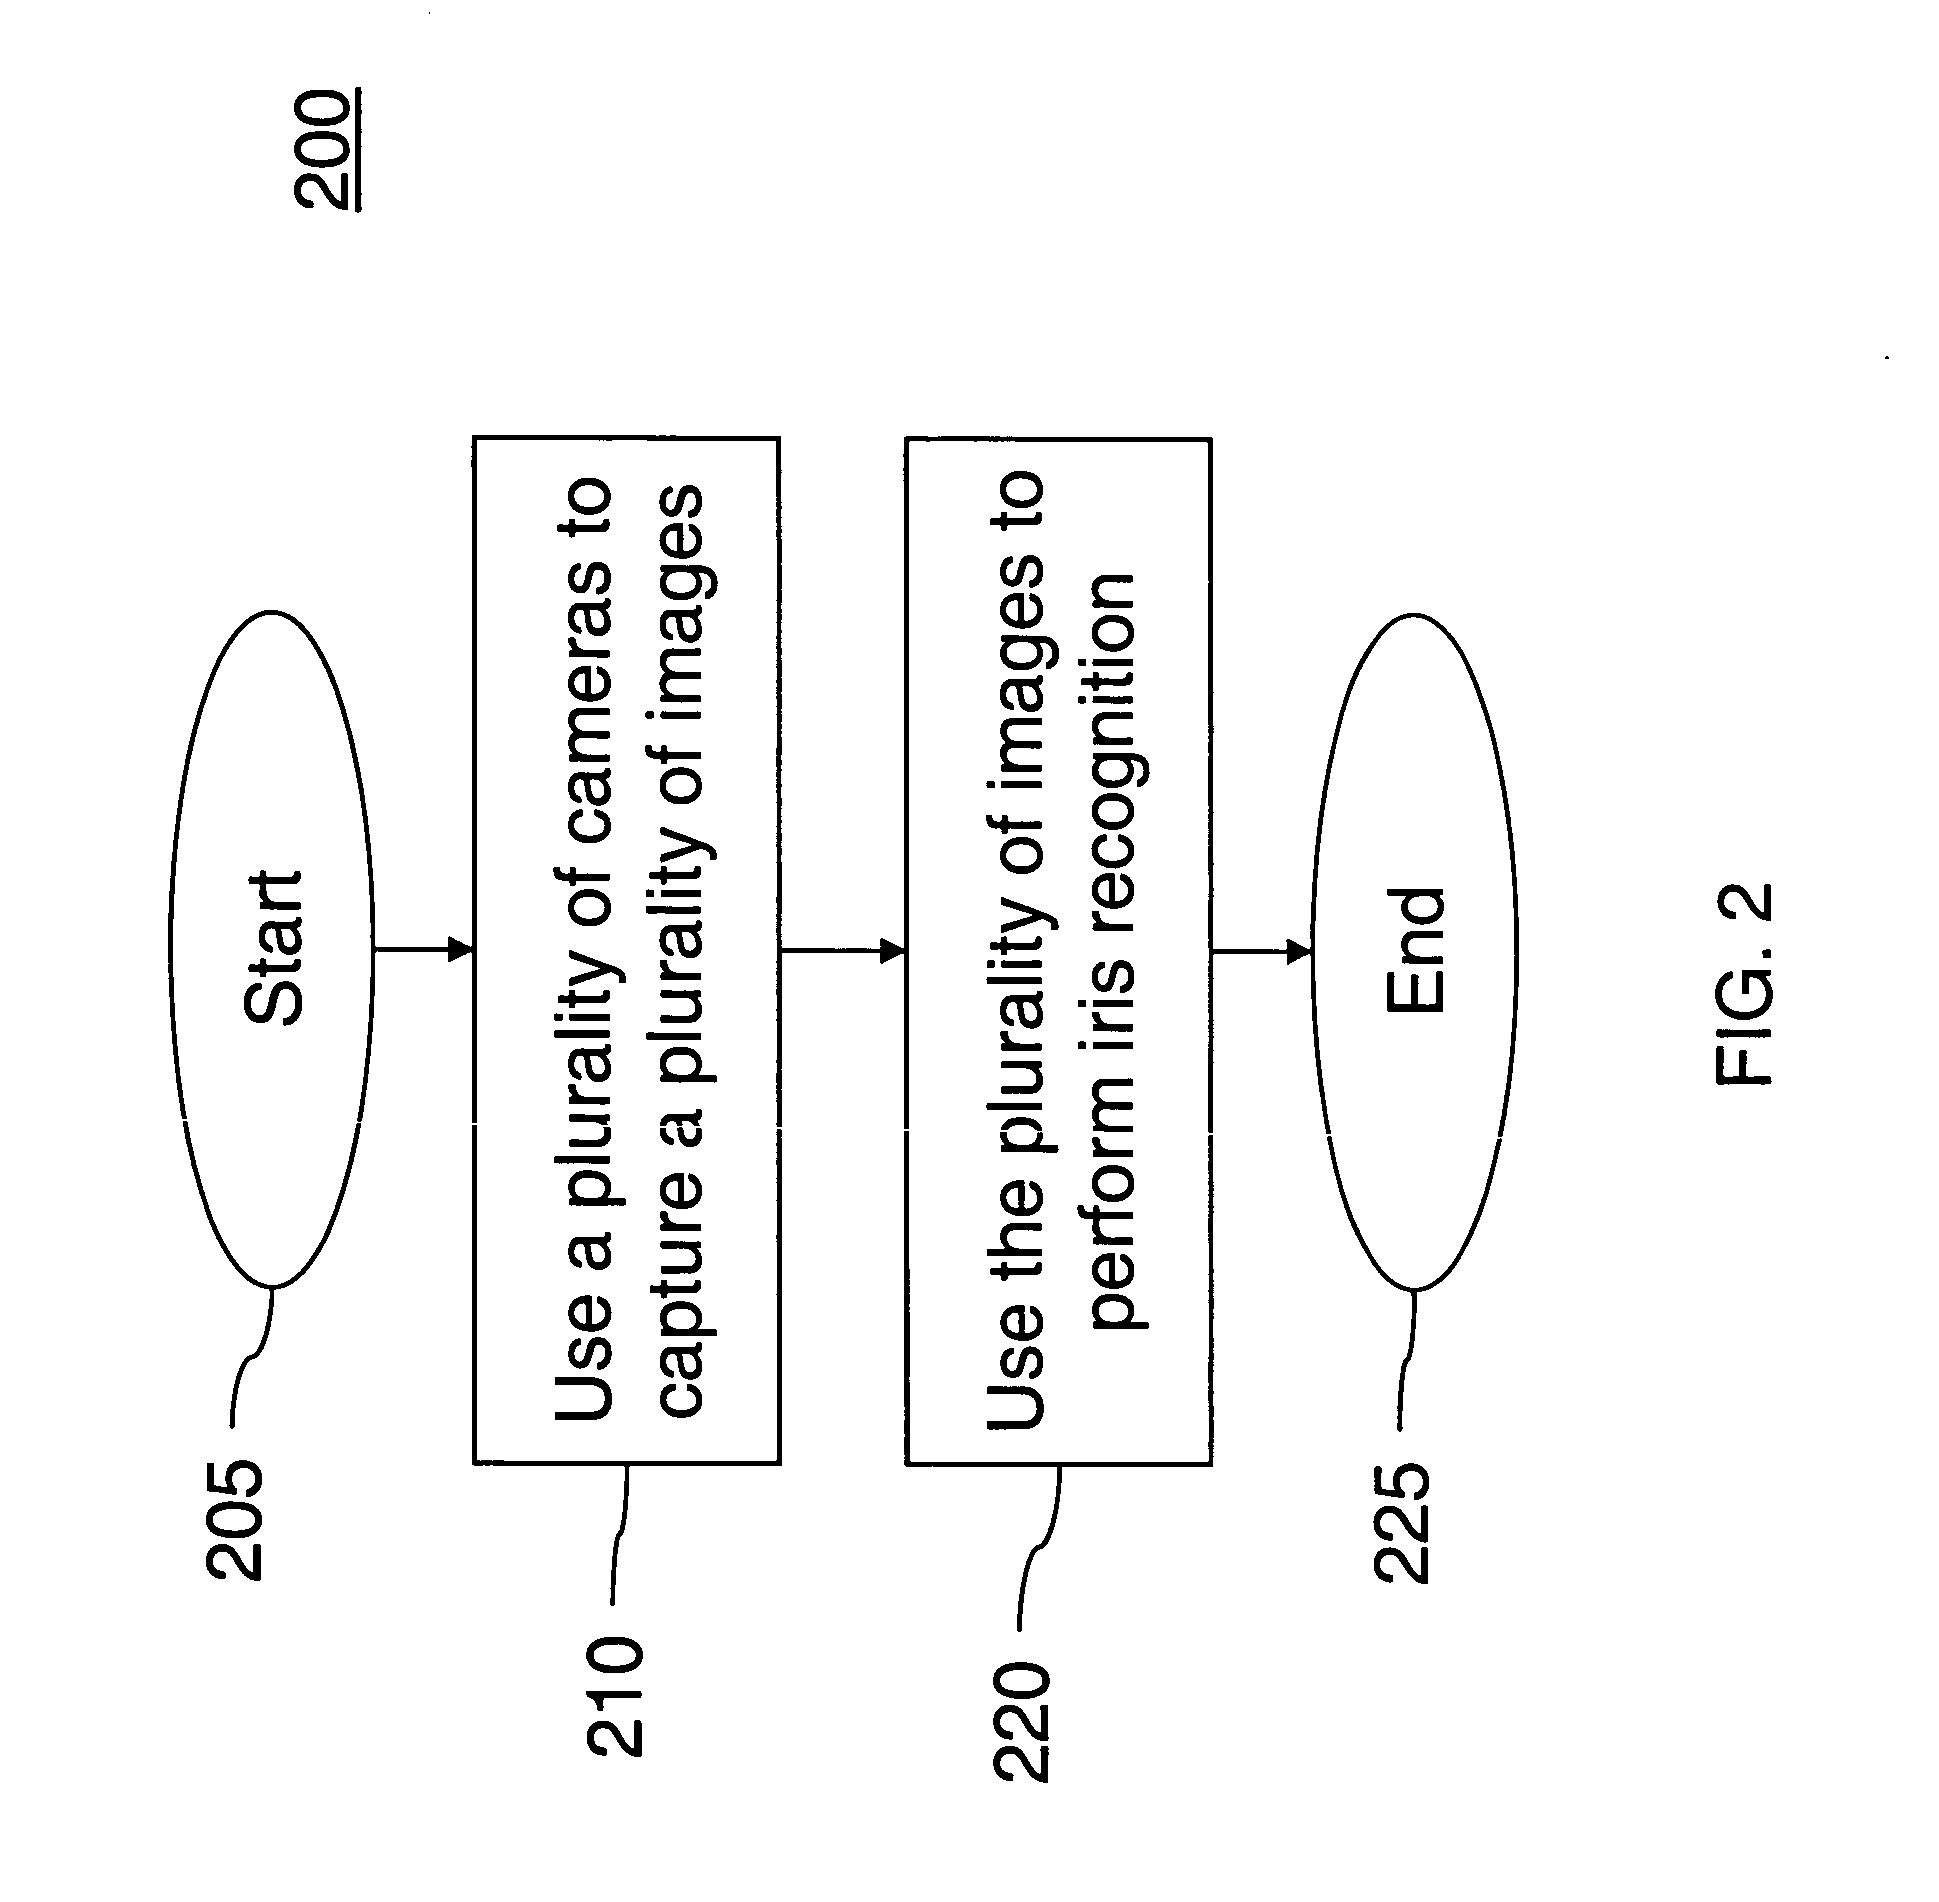 Method and apparatus for performing iris recognition from an image